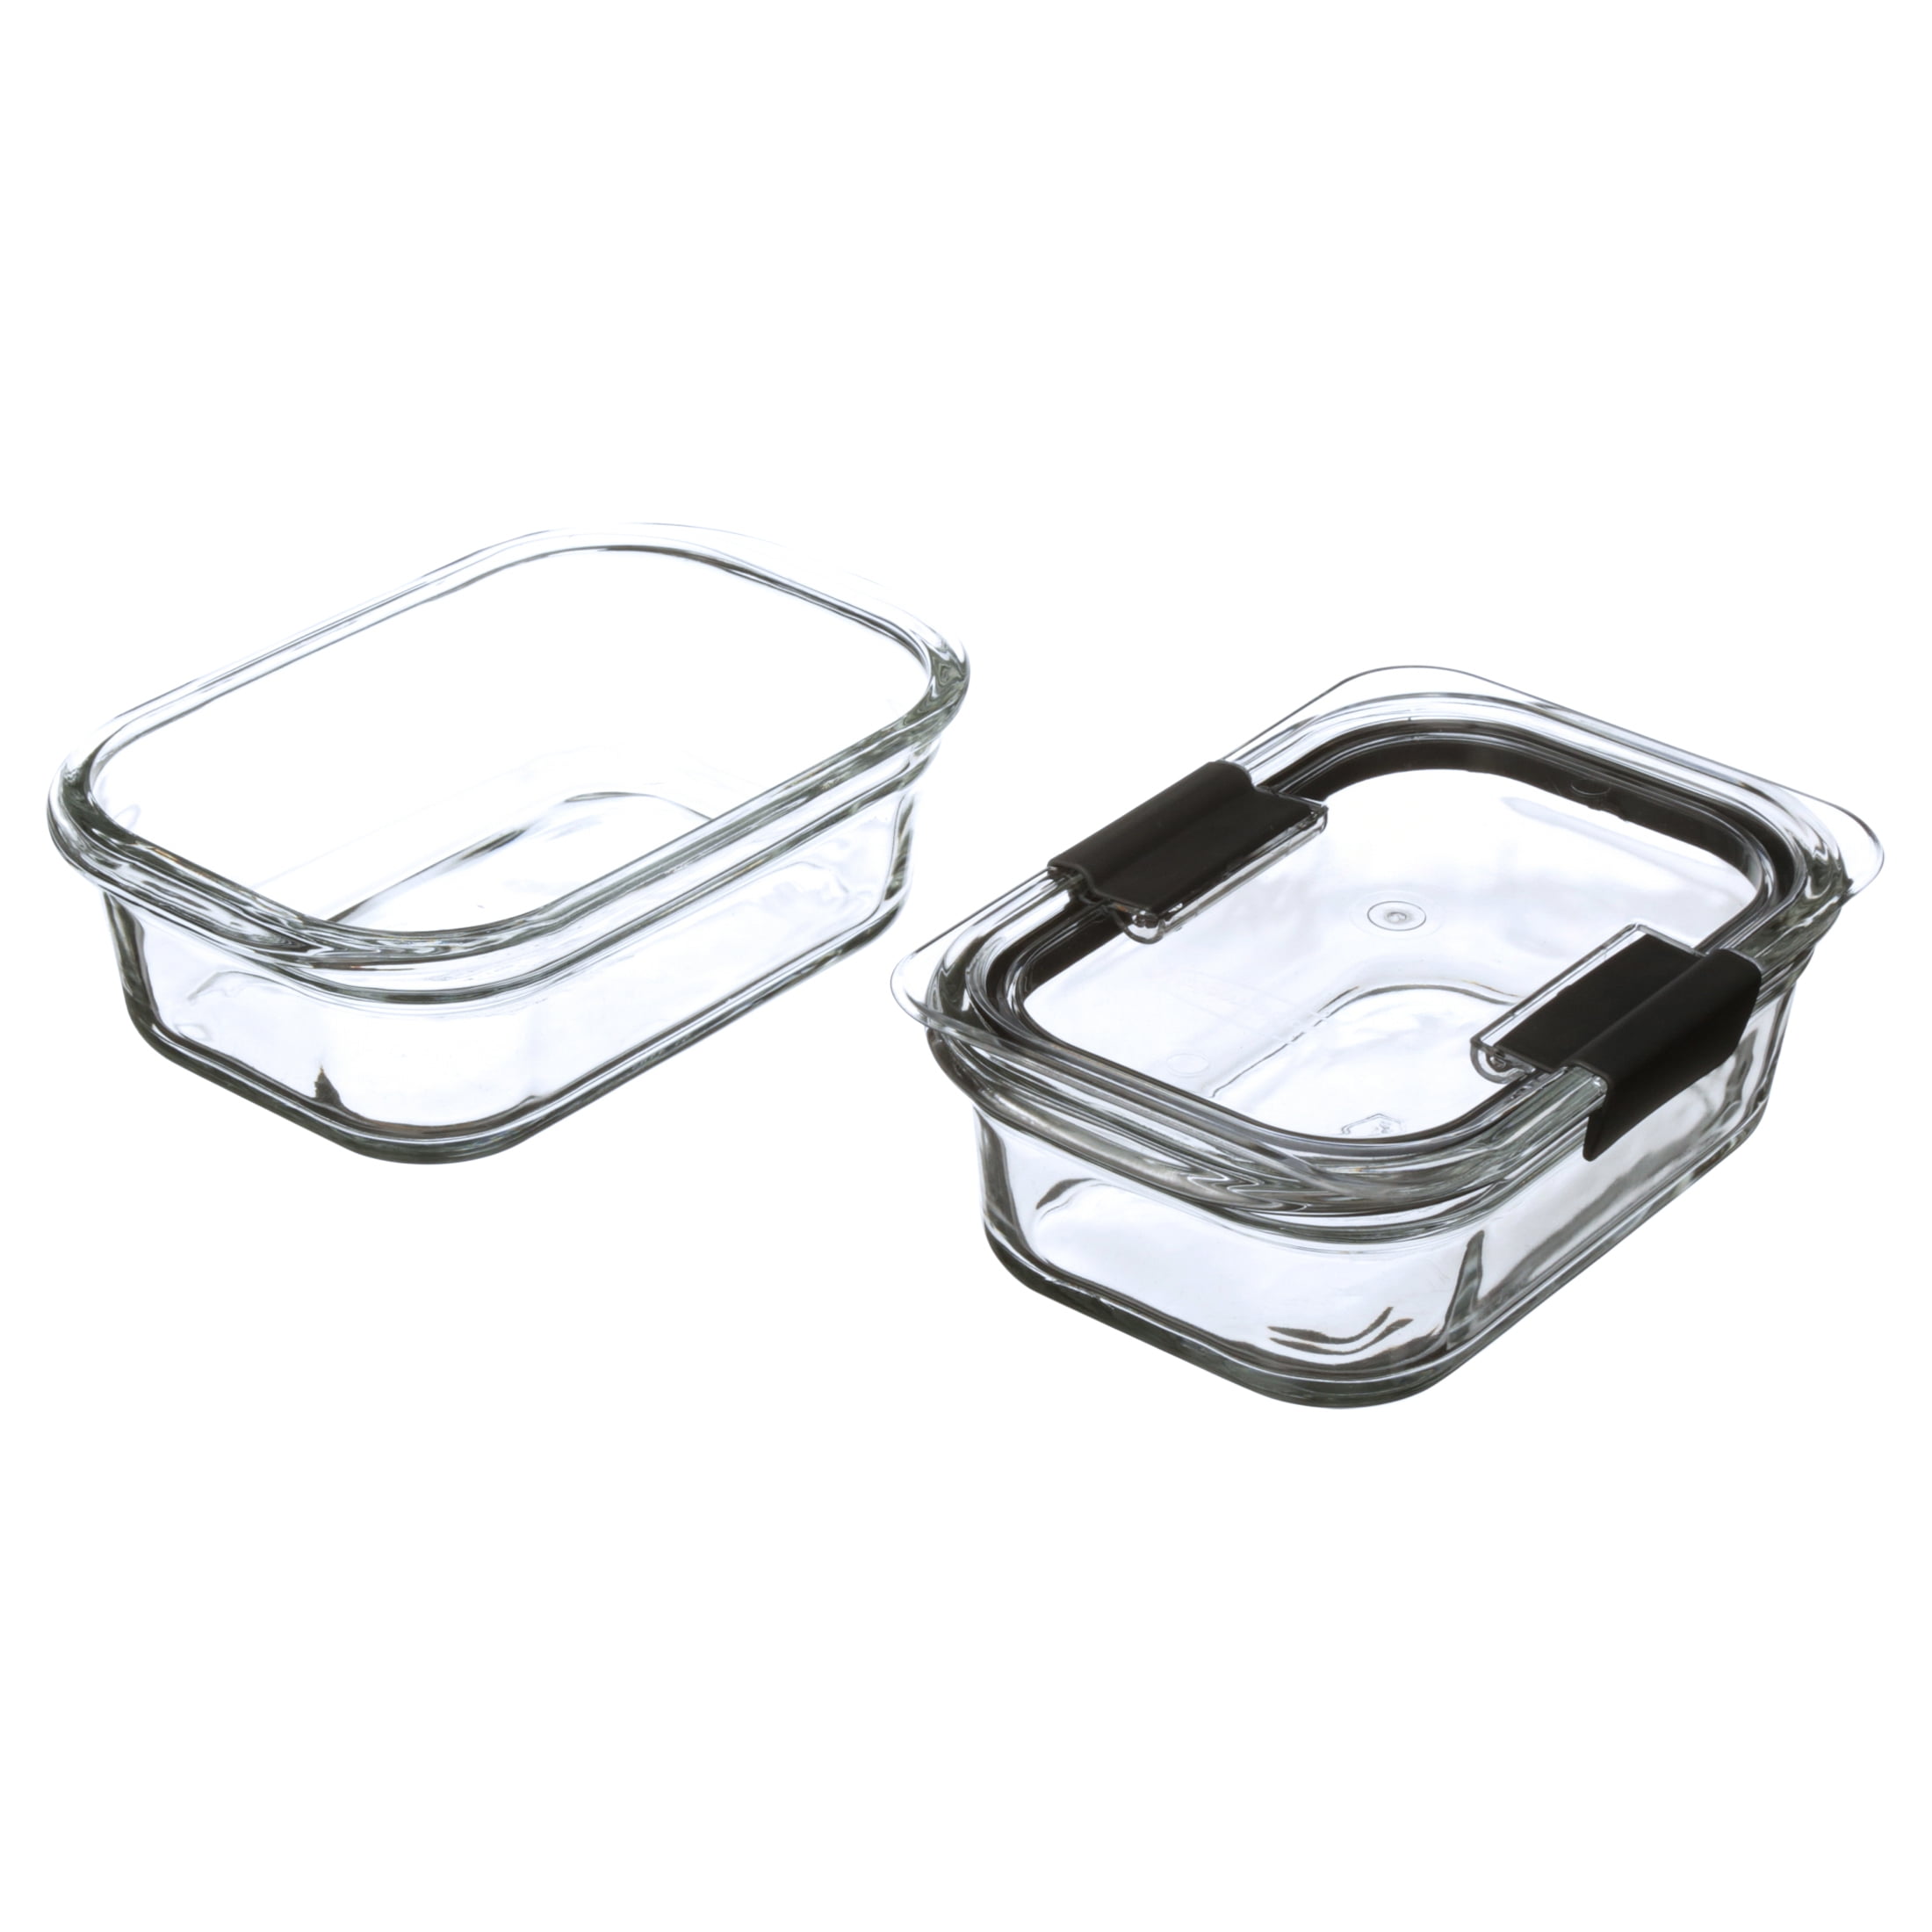 Rubbermaid® Brilliance Glass Food Storage Containers, 2 pk - QFC